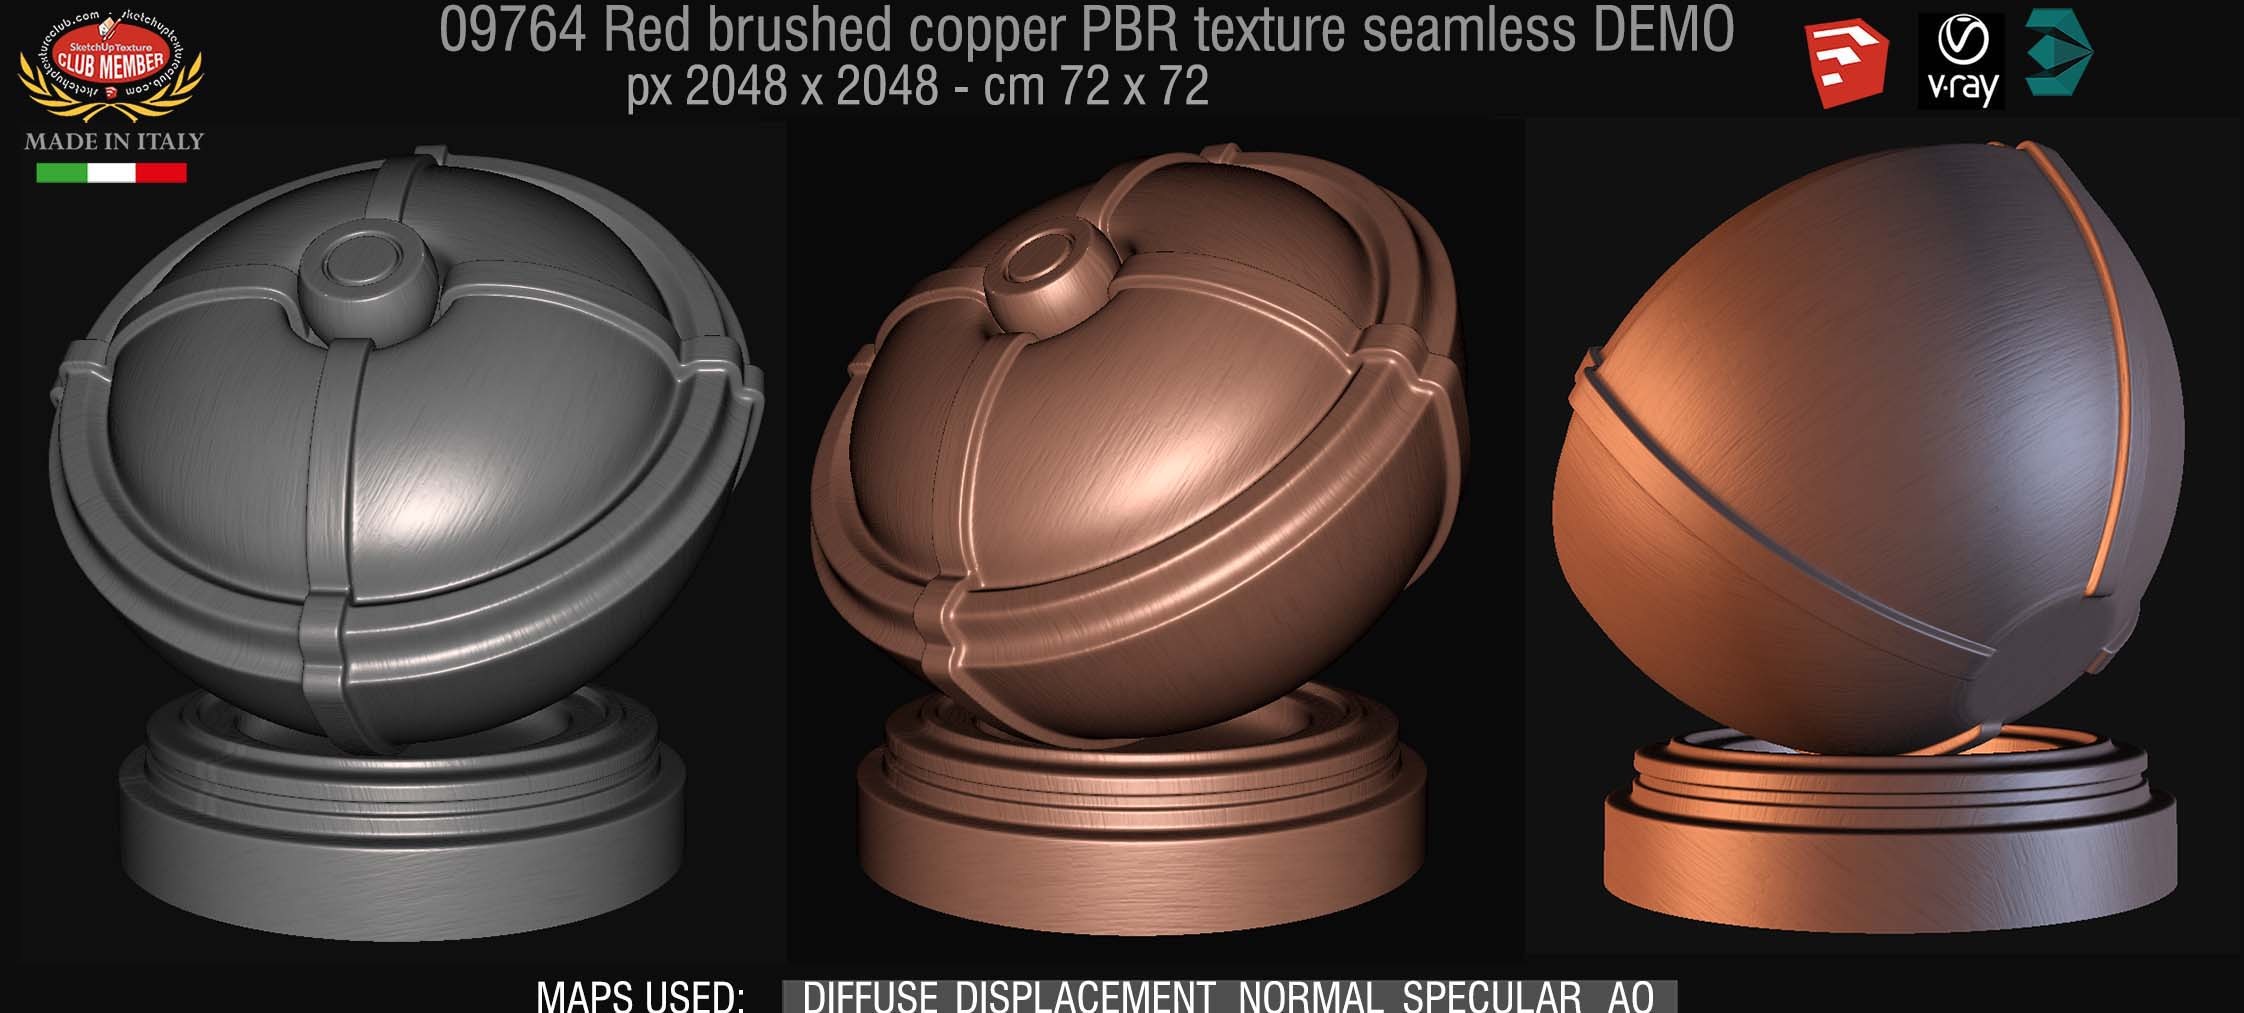 09764 Red brushed copper metal PBR texture seamless DEMO